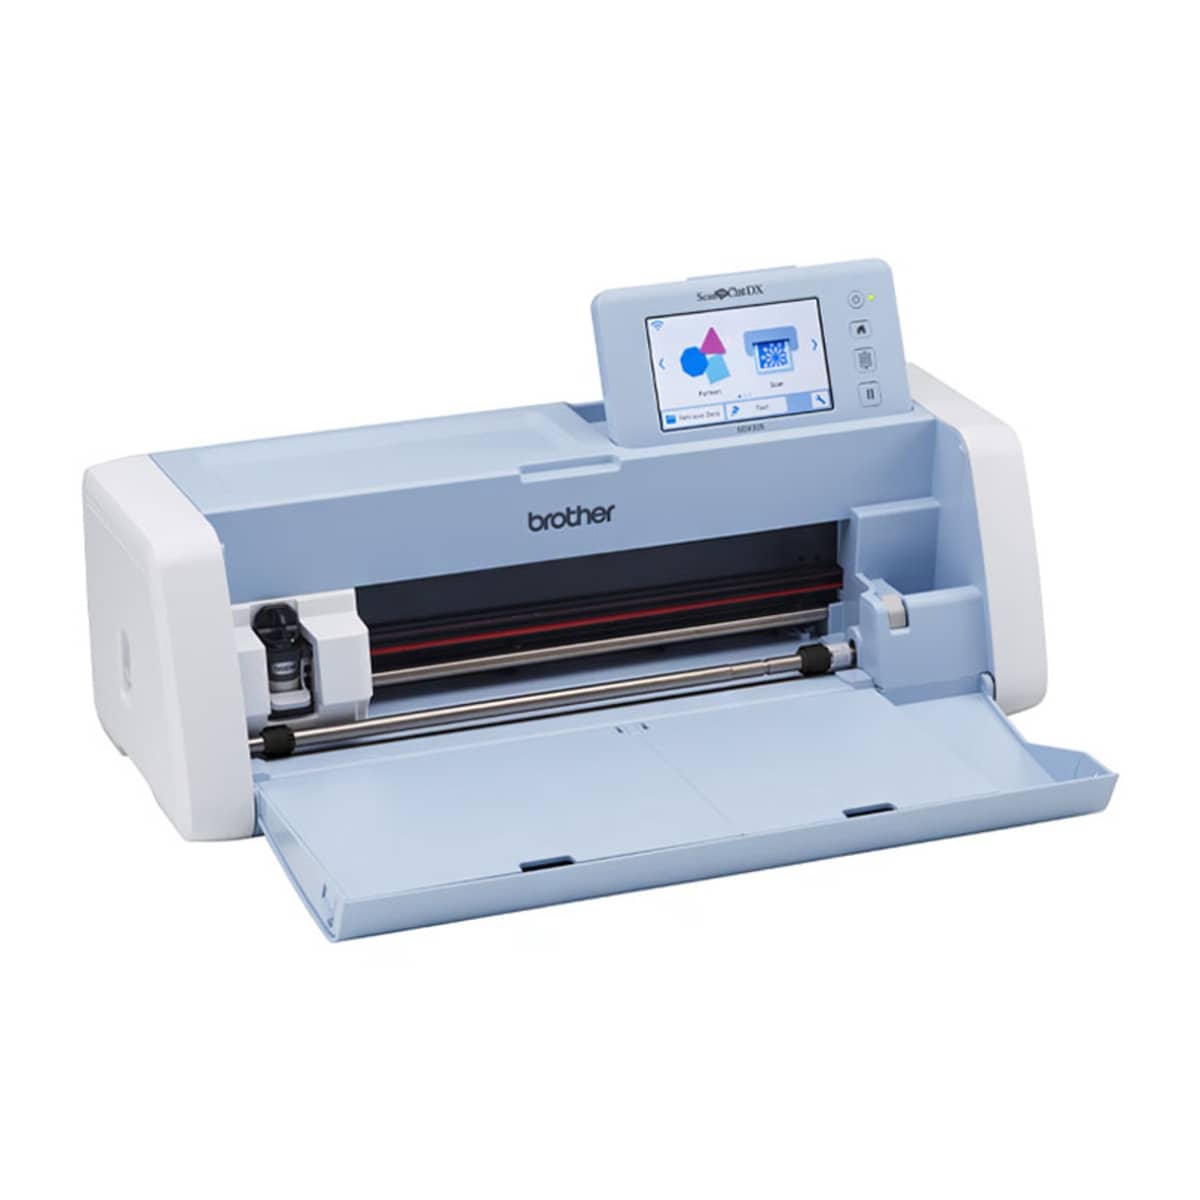 Brother Persona PRS100 Multi-Needle - Moore's Sewing